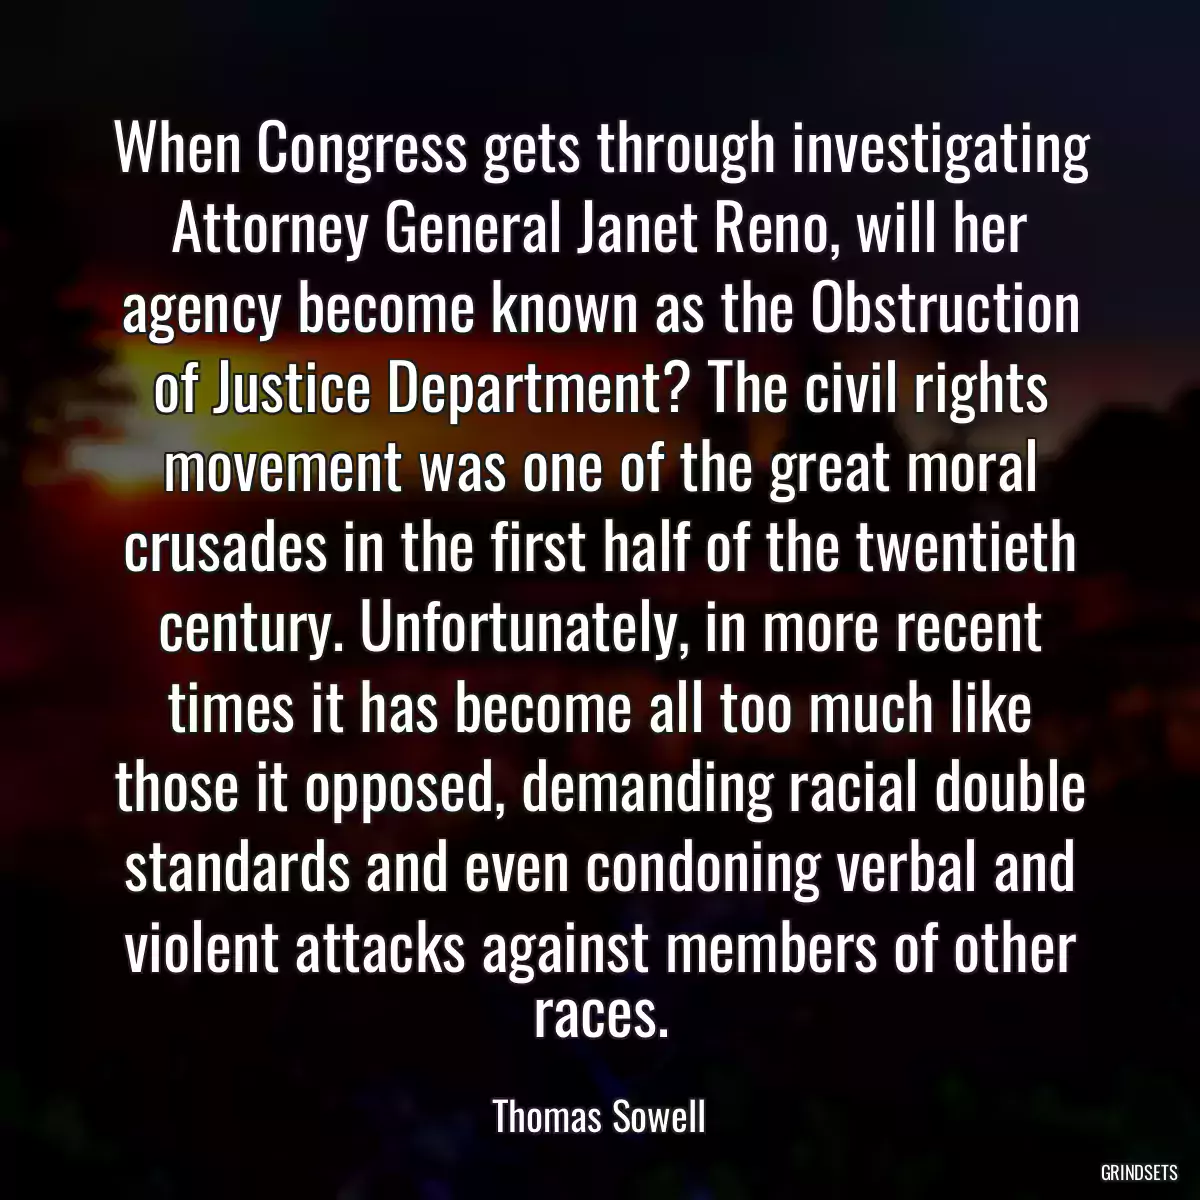 When Congress gets through investigating Attorney General Janet Reno, will her agency become known as the Obstruction of Justice Department? The civil rights movement was one of the great moral crusades in the first half of the twentieth century. Unfortunately, in more recent times it has become all too much like those it opposed, demanding racial double standards and even condoning verbal and violent attacks against members of other races.